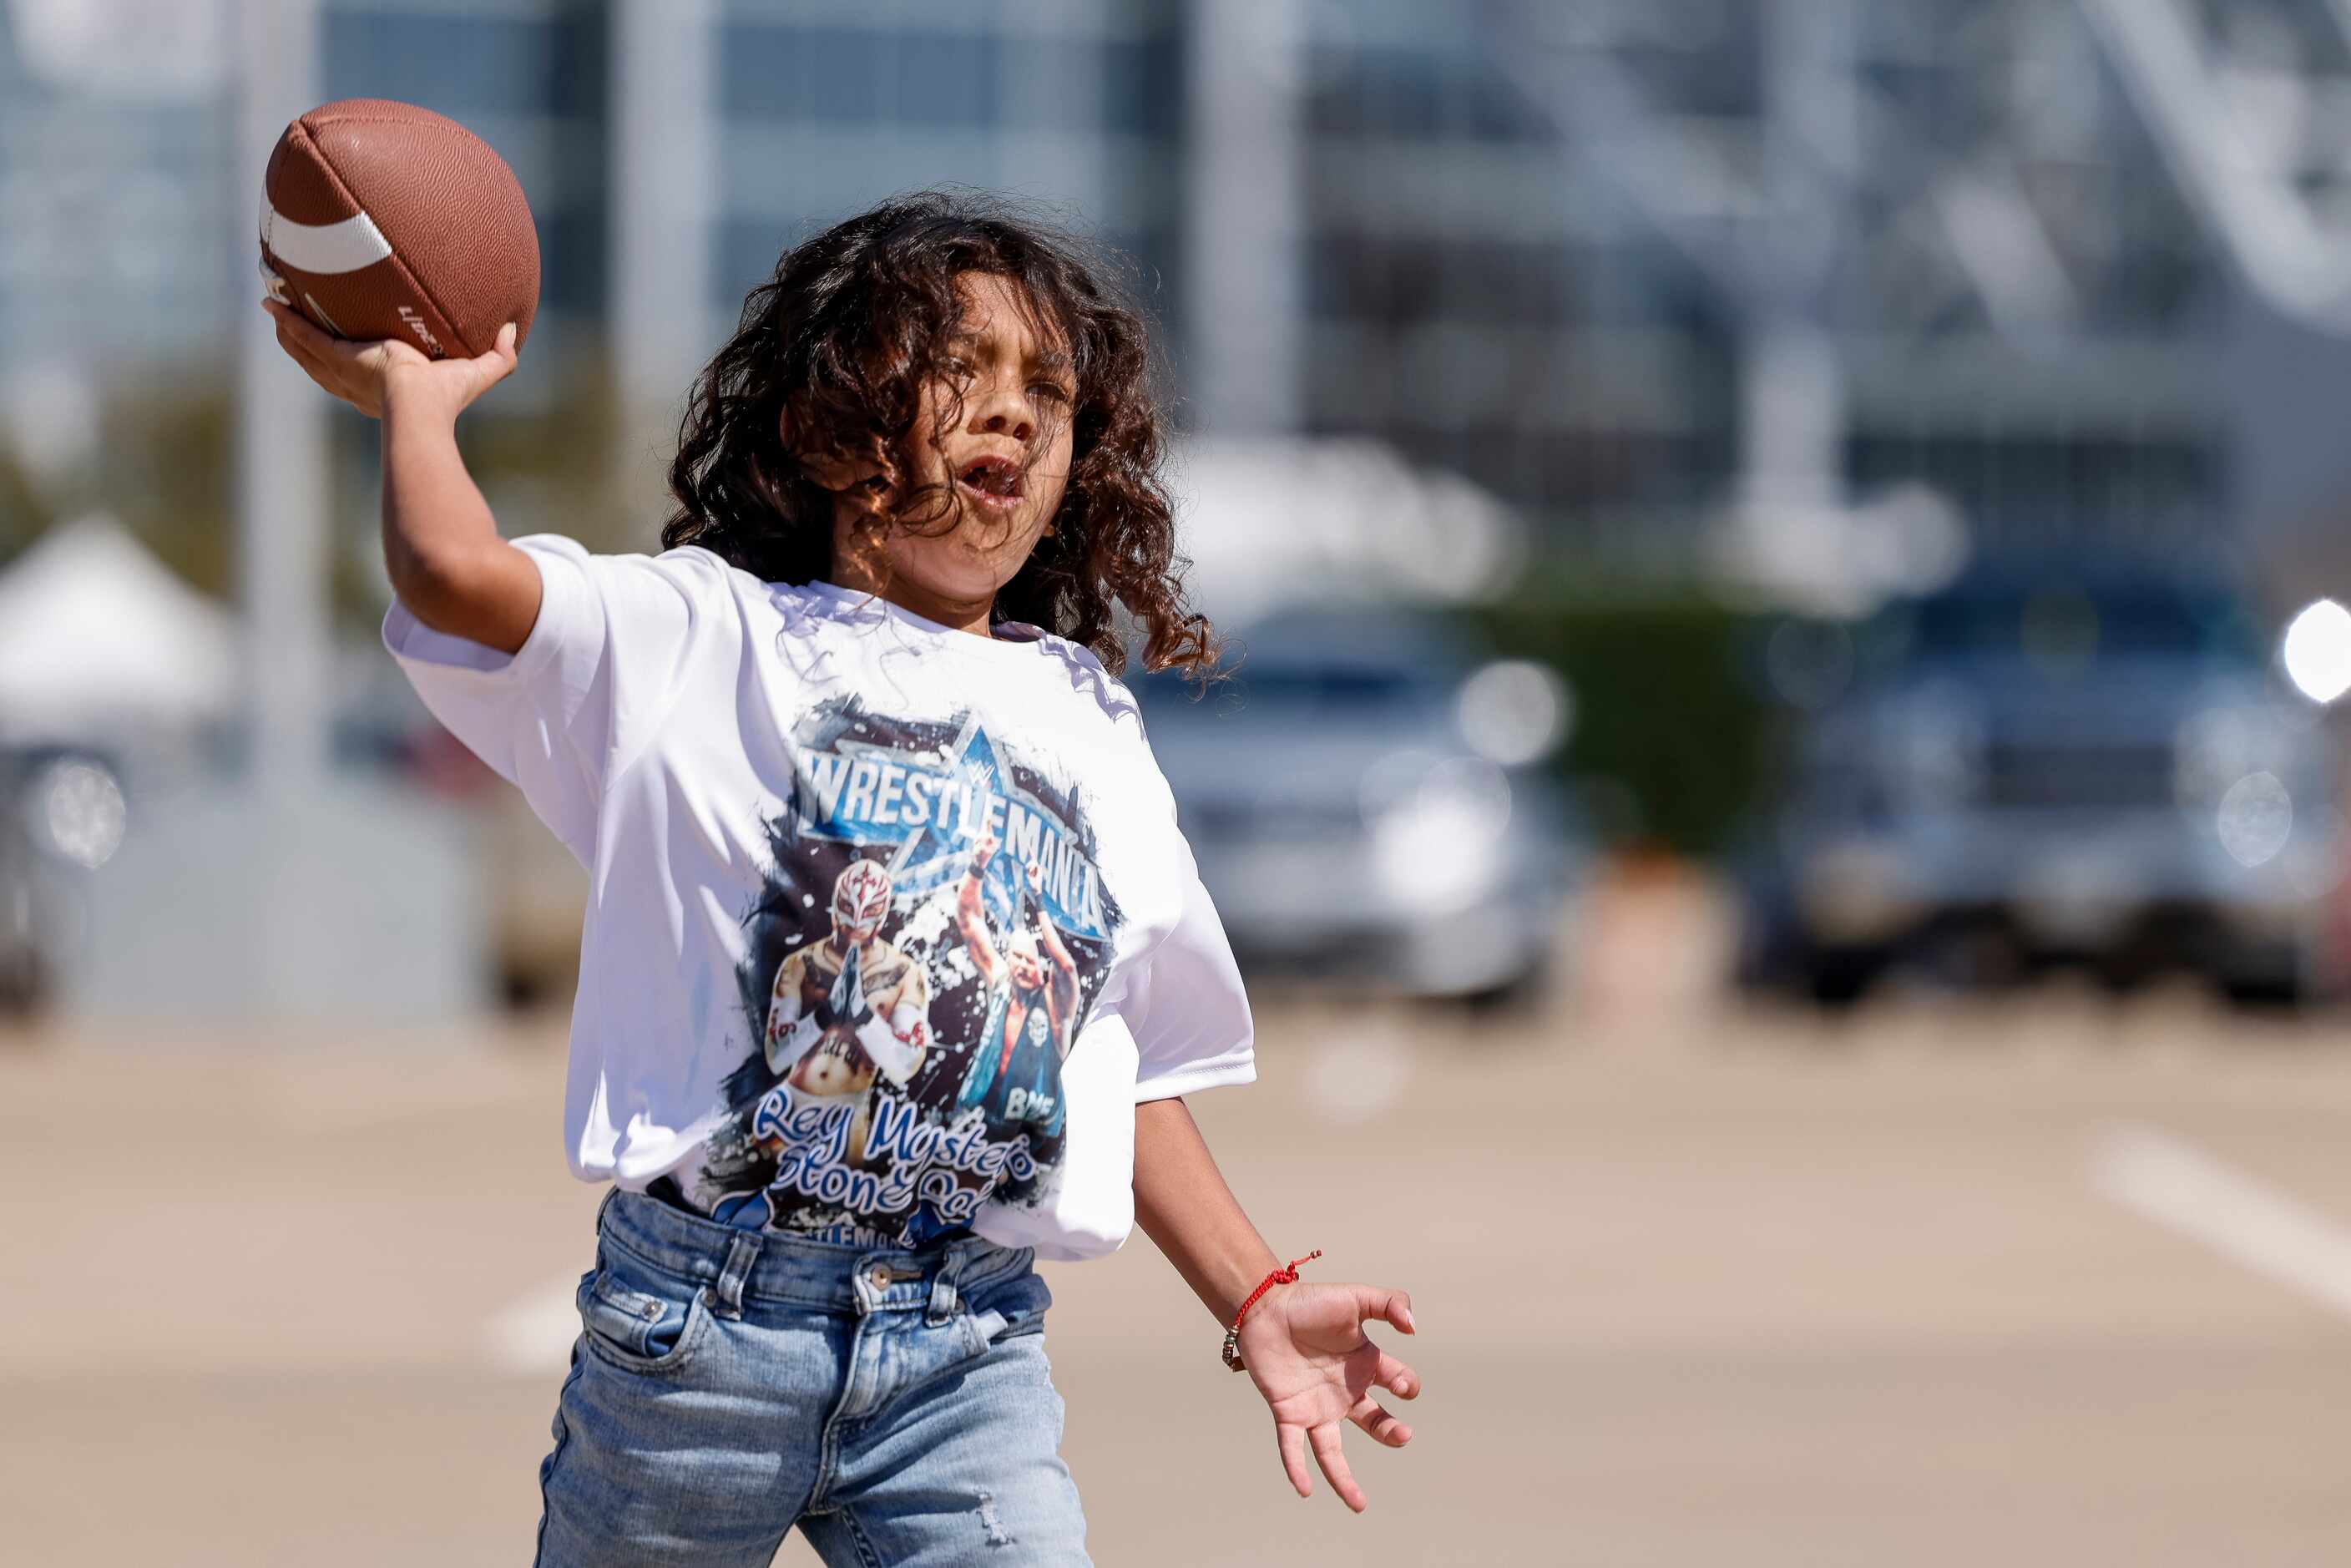 Jet Salazar, 7, throws a football with his dad before WrestleMania 38 at AT&T Stadium in...